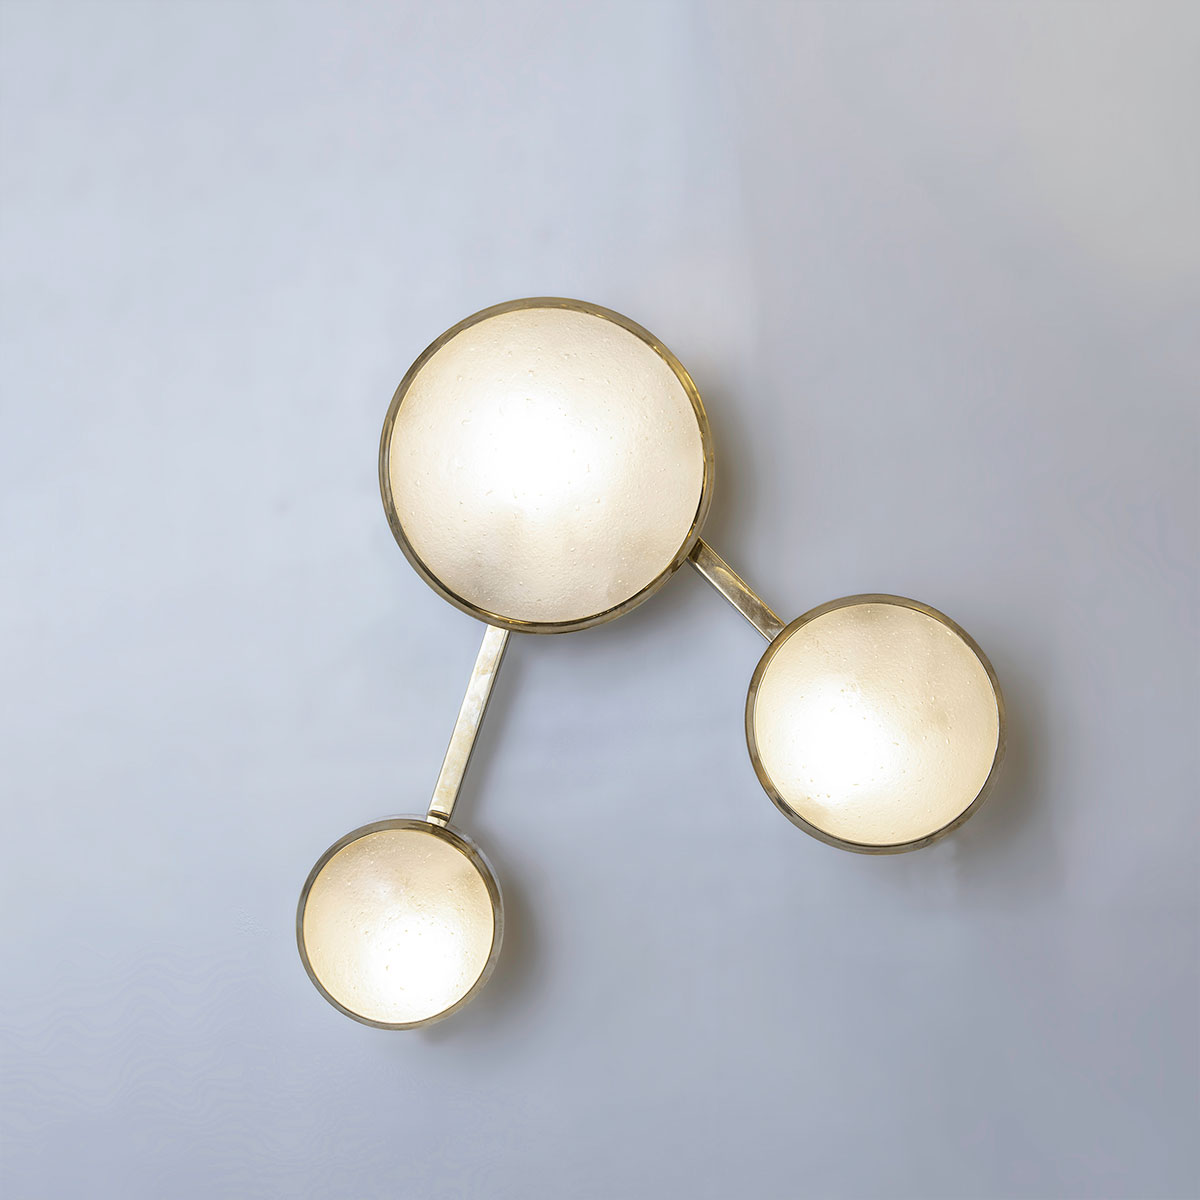 geo wall light by gaspare asaro